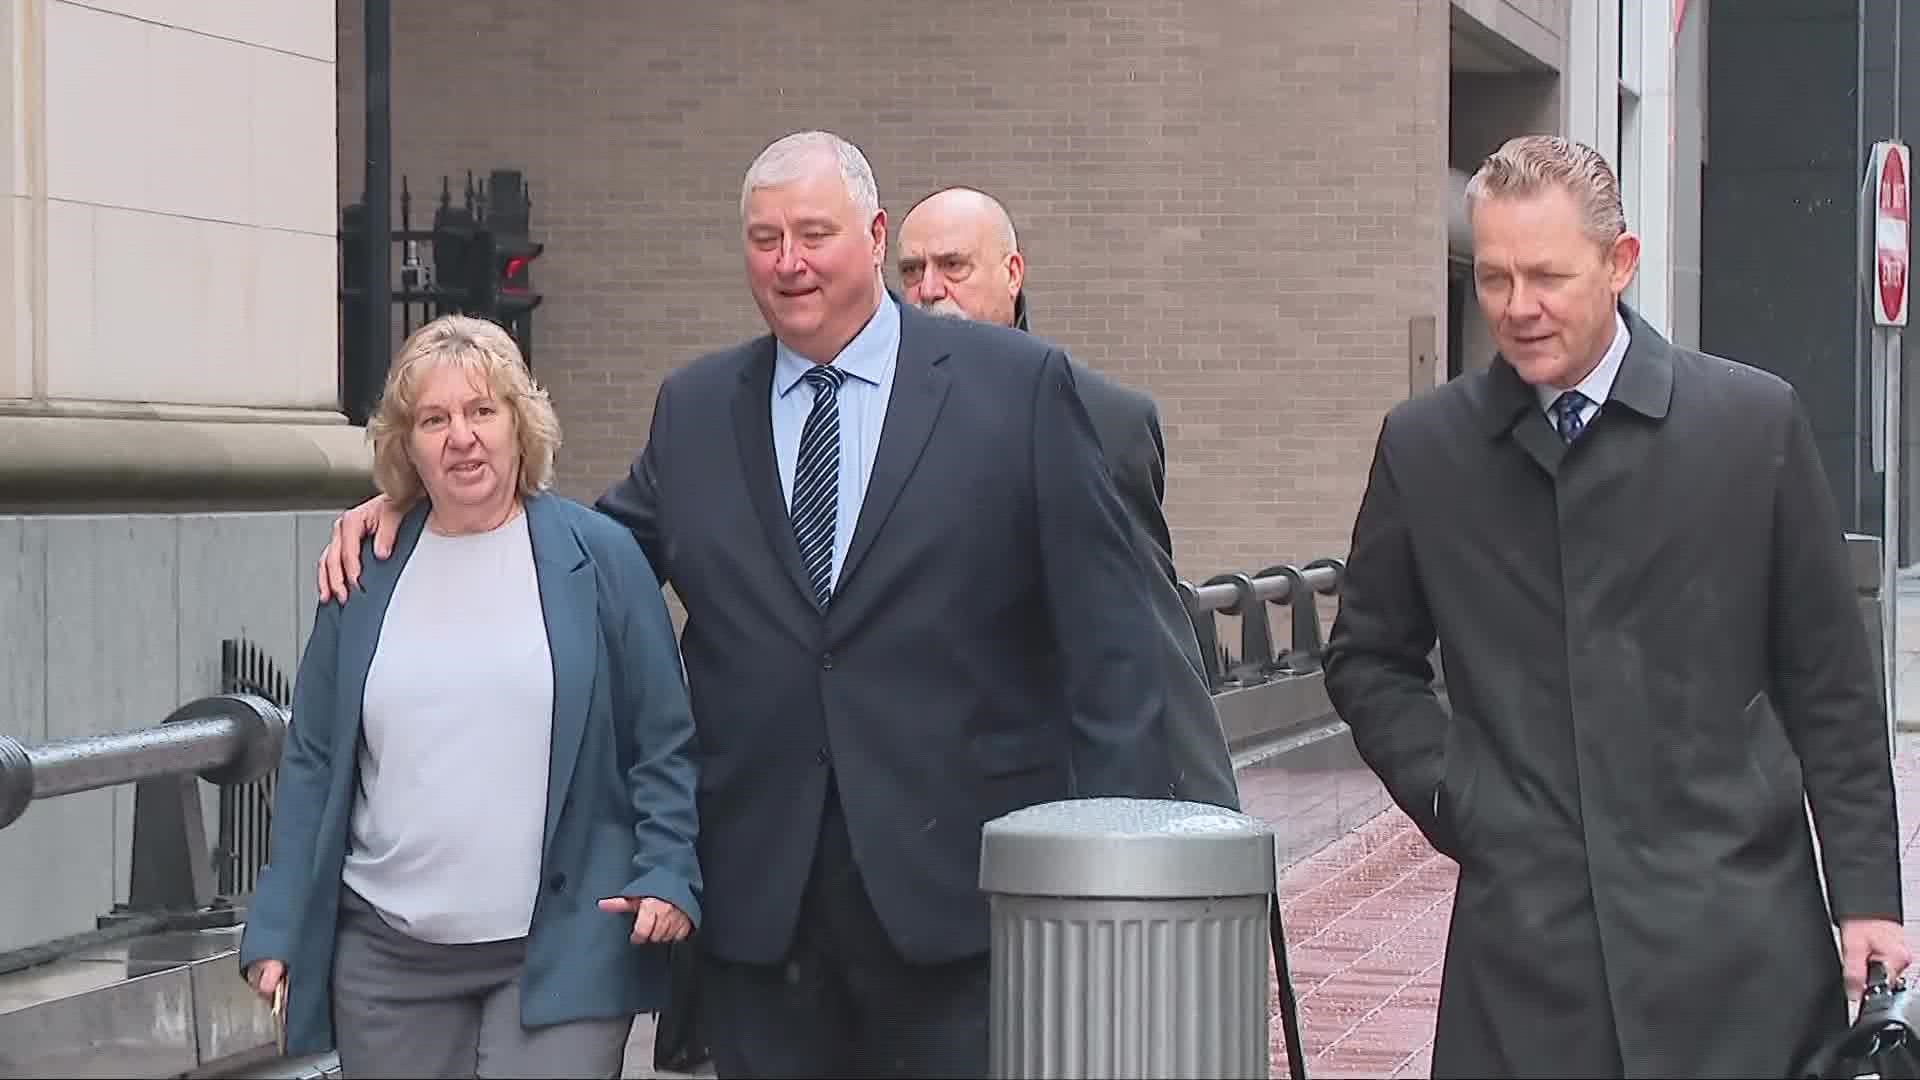 As his federal racketeering trial kicked off Monday, former Ohio House Speaker Larry Householder said he is optimistic.